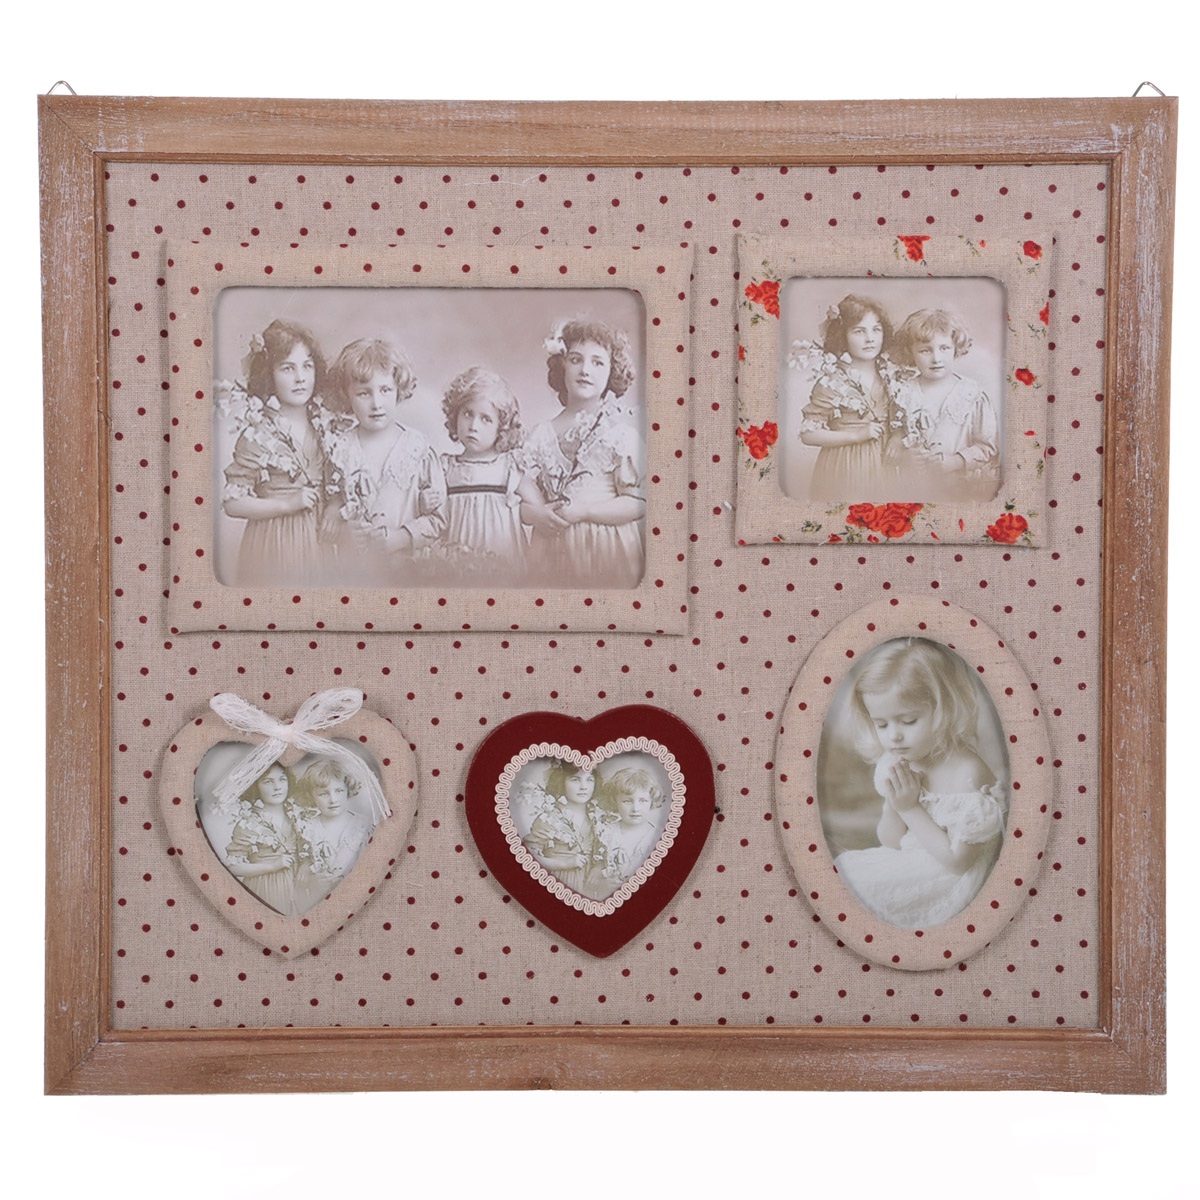 HEARTS, S.VALENTINE, MOM'S DAY, ACCESSORIES WITH HEART-BALLOONS,RIBBONS, LABEL ETC, CORNICE COMPOSITA X 5 44X32 CM